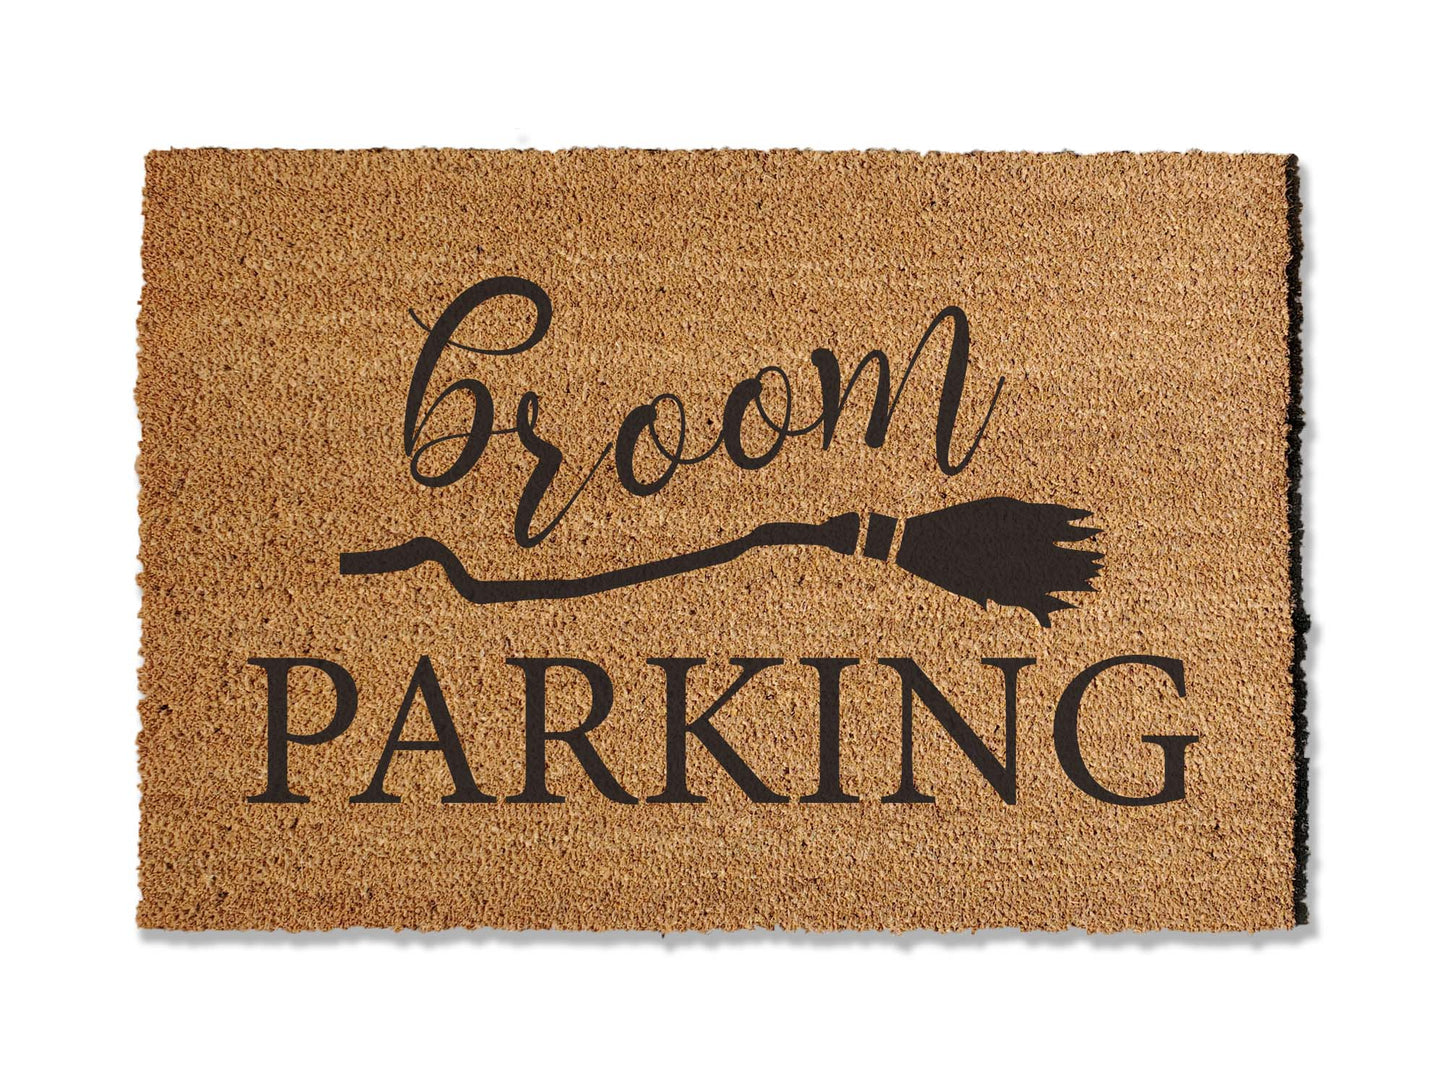 1/2 inch thick coir doormat featuring a funny Halloween doormat saying broom parking, adding a touch of intrigue to your entryway. Highly effective at trapping dirt, this mat combines functionality with a unique and eye-catching aesthetic to elevate your doorstep.